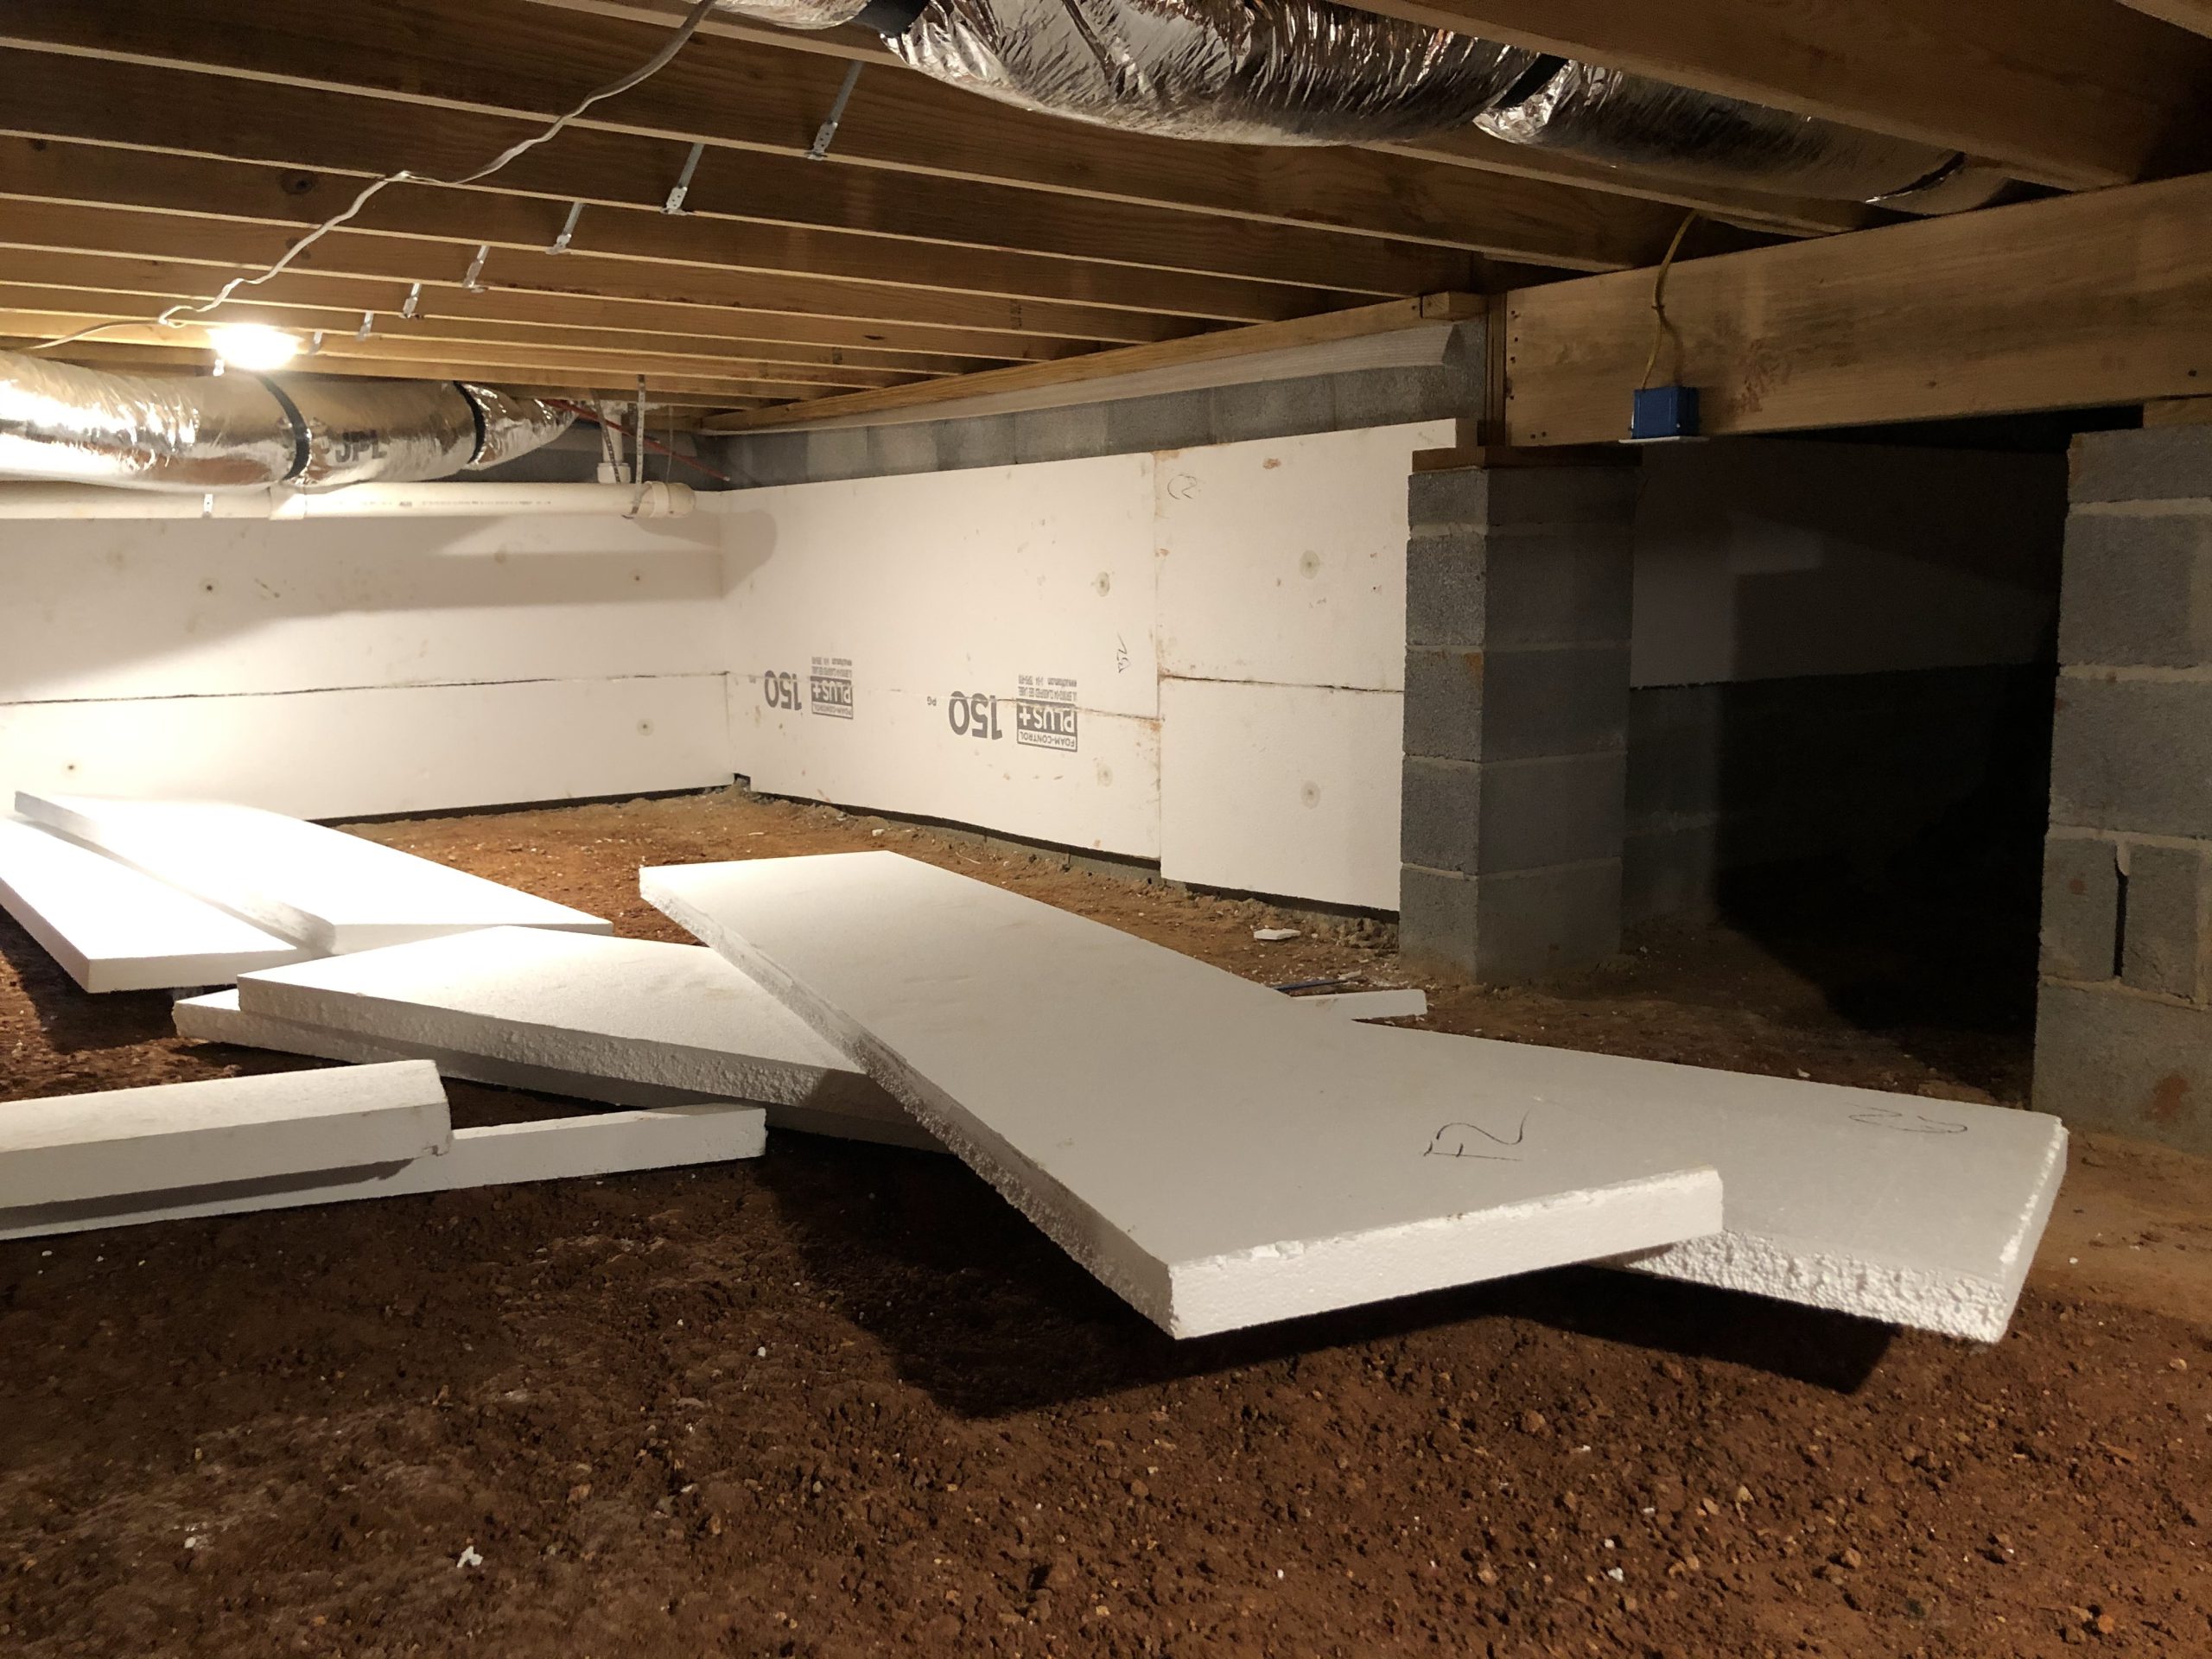 Moisture and humid air flow in unvented crawl spaces may lead to mold and pest problems